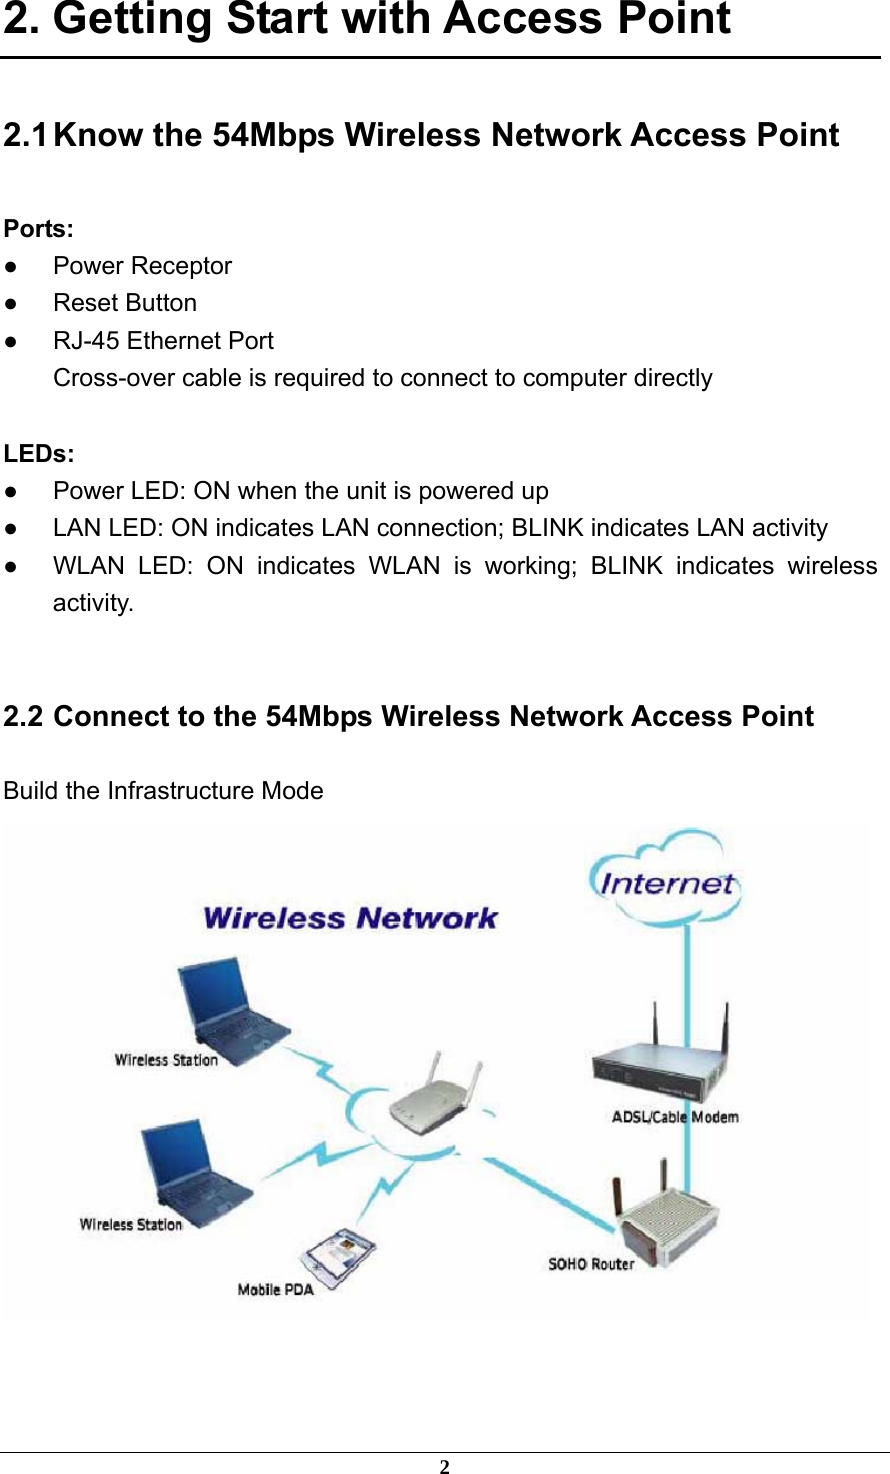 2. Getting Start with Access Point  2.1 Know the 54Mbps Wireless Network Access Point  Ports: ● Power Receptor ● Reset Button ●  RJ-45 Ethernet Port Cross-over cable is required to connect to computer directly  LEDs: ●  Power LED: ON when the unit is powered up ●  LAN LED: ON indicates LAN connection; BLINK indicates LAN activity ●  WLAN LED: ON indicates WLAN is working; BLINK indicates wireless activity.  2.2 Connect to the 54Mbps Wireless Network Access Point Build the Infrastructure Mode    2 